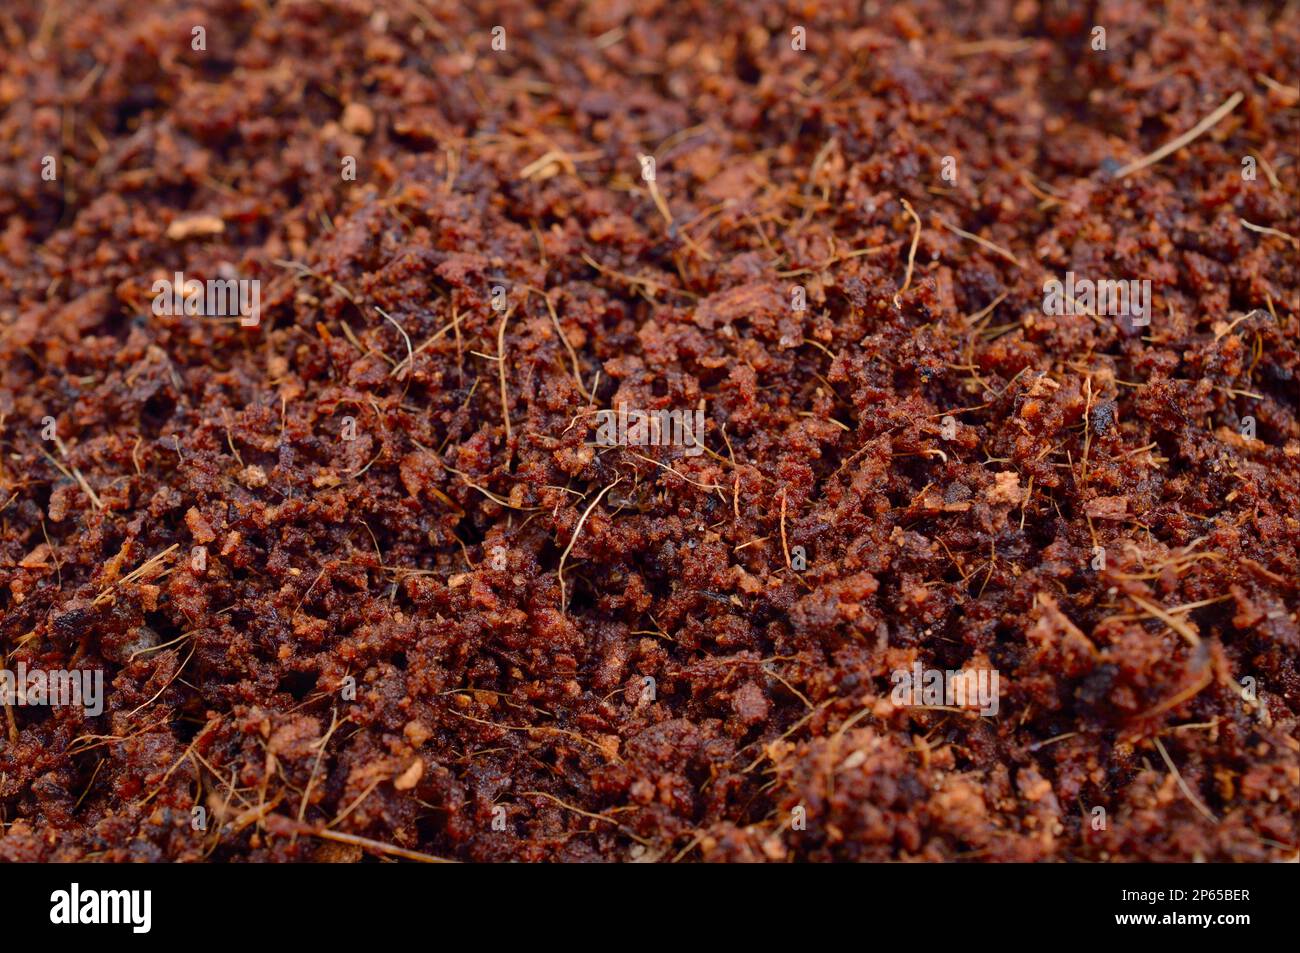 Coconut Coir substrate for for agricultur. Background. Stock Photo